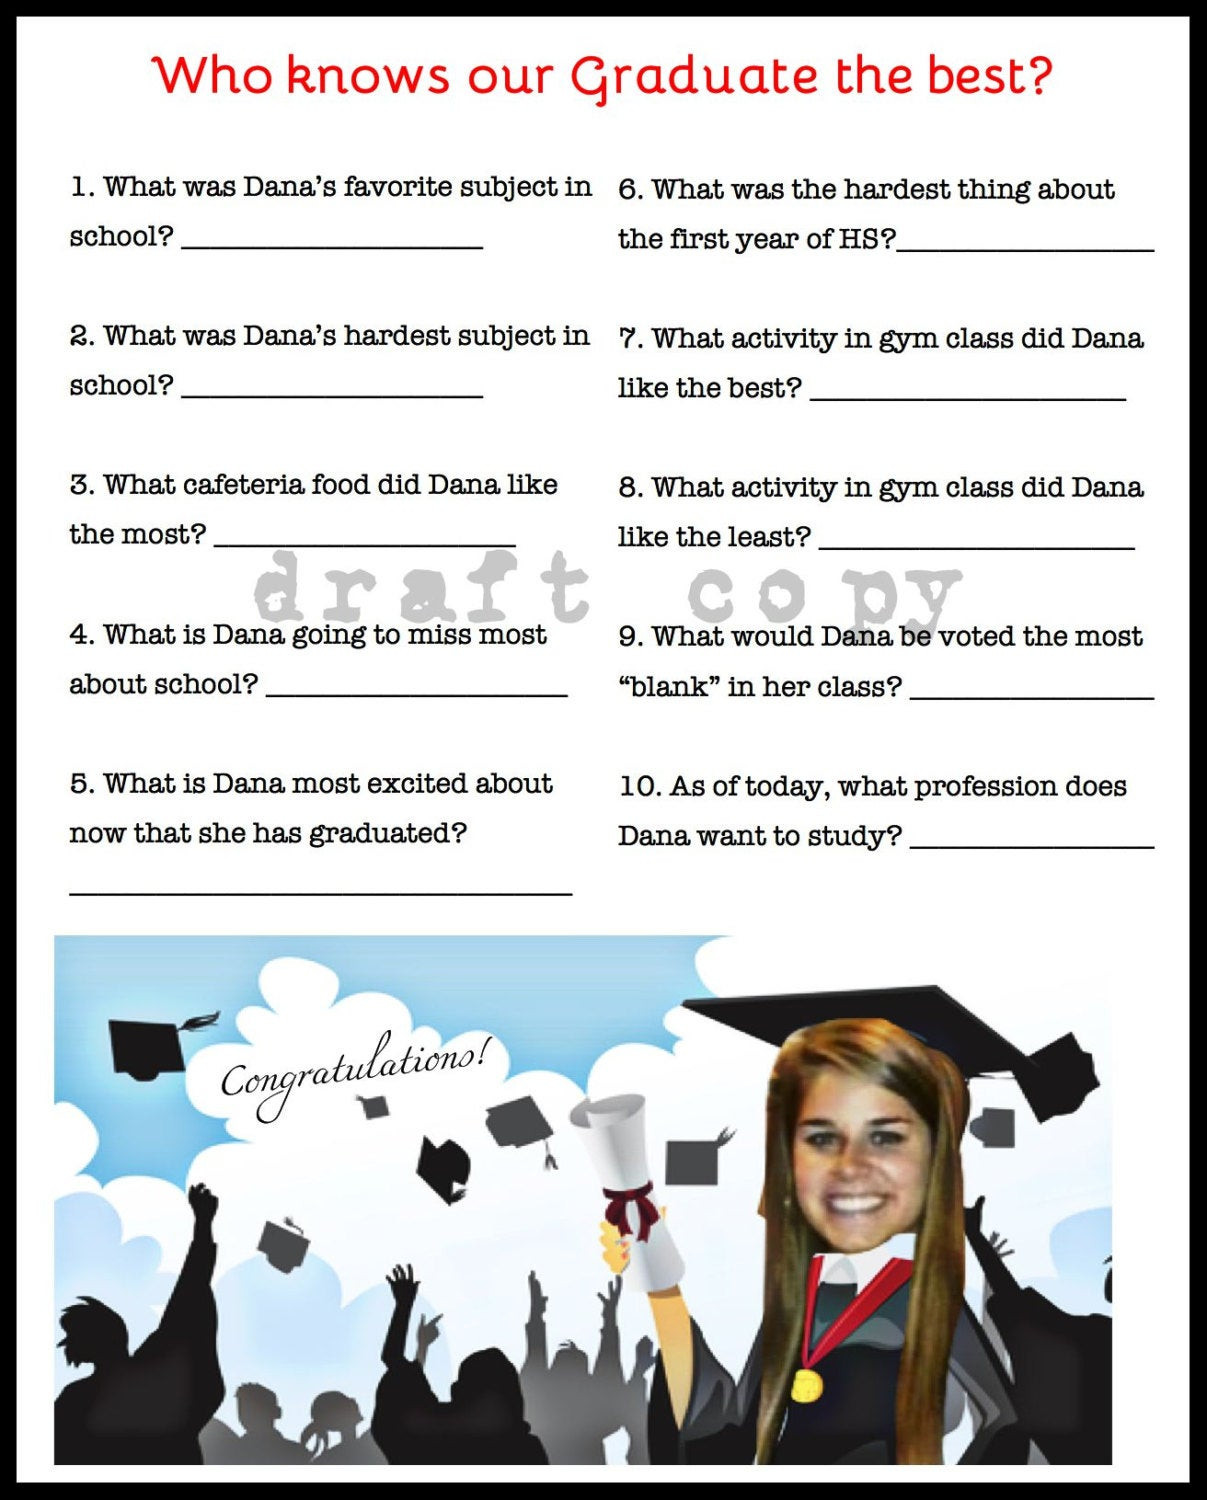 College Graduation Party Game Ideas
 College Graduation Party Game Who knows the graduate the best